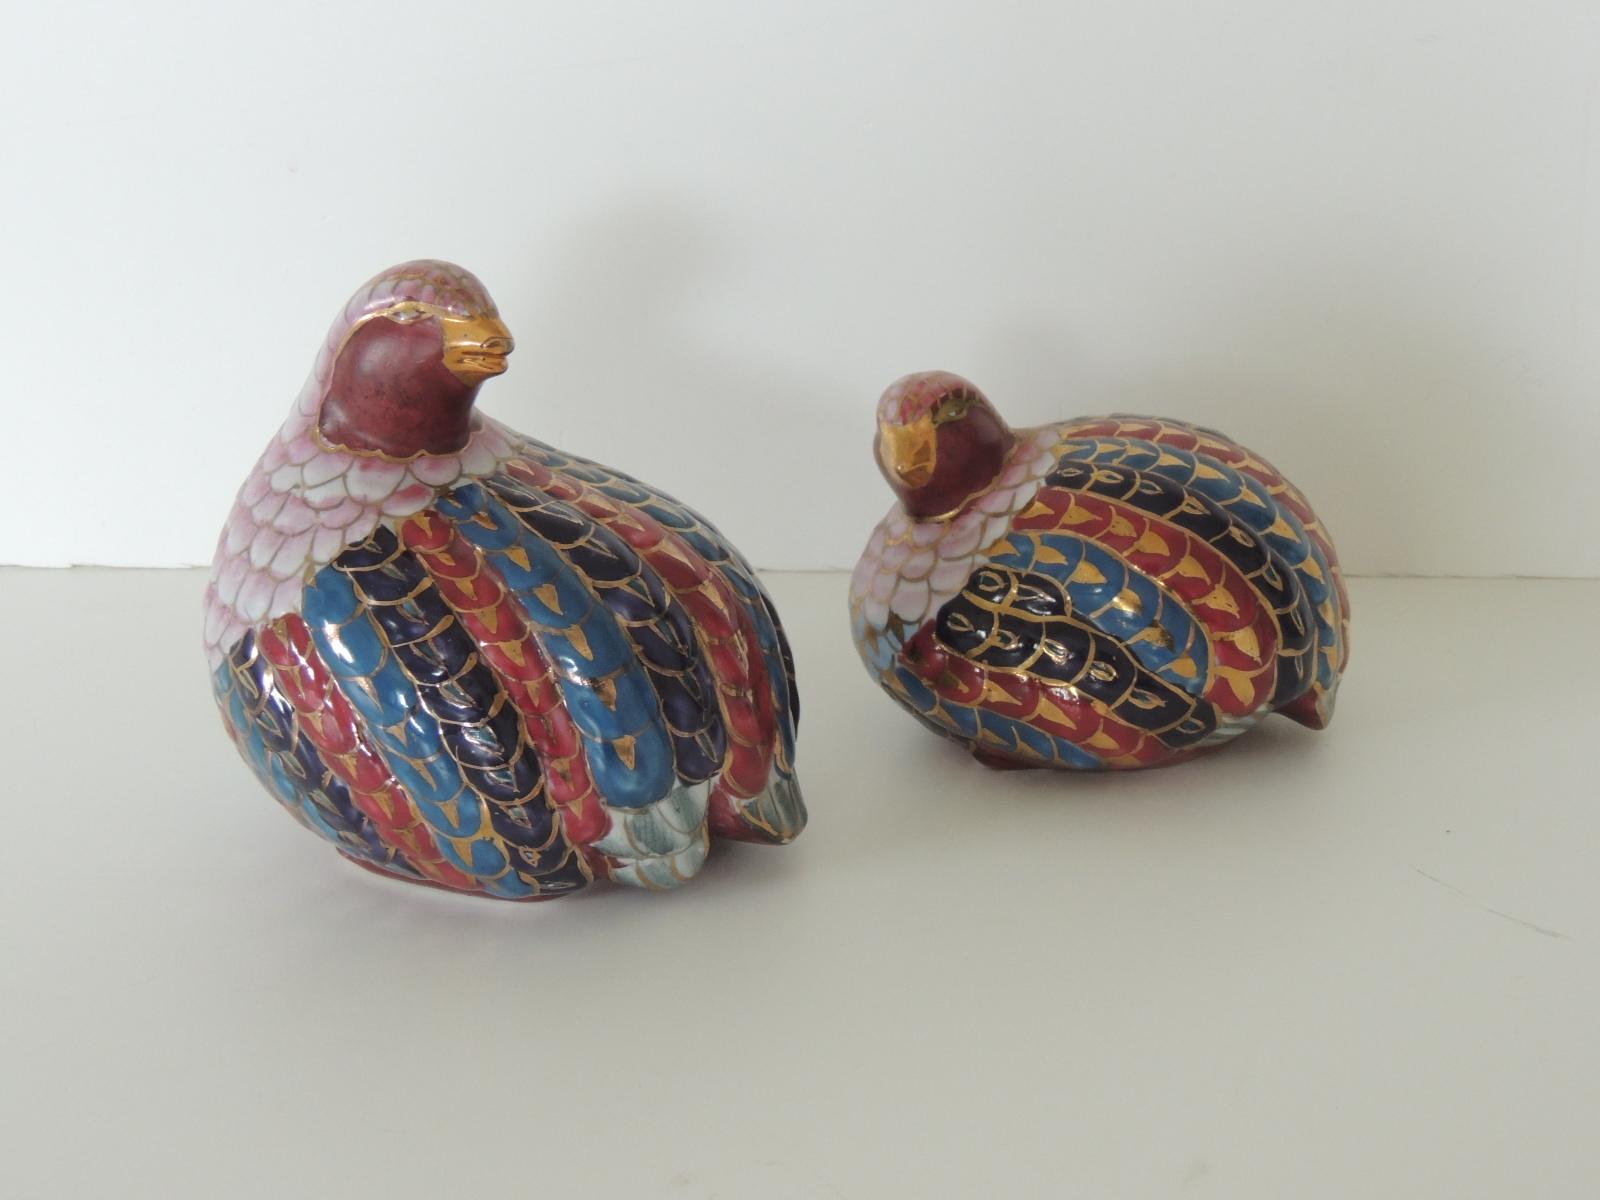 Vintage pair of cloisonné style quails.
Pair of colorful birds in shades of pink, blue, burgundy and turquoise with gold accents.
Measures: Male 5.5